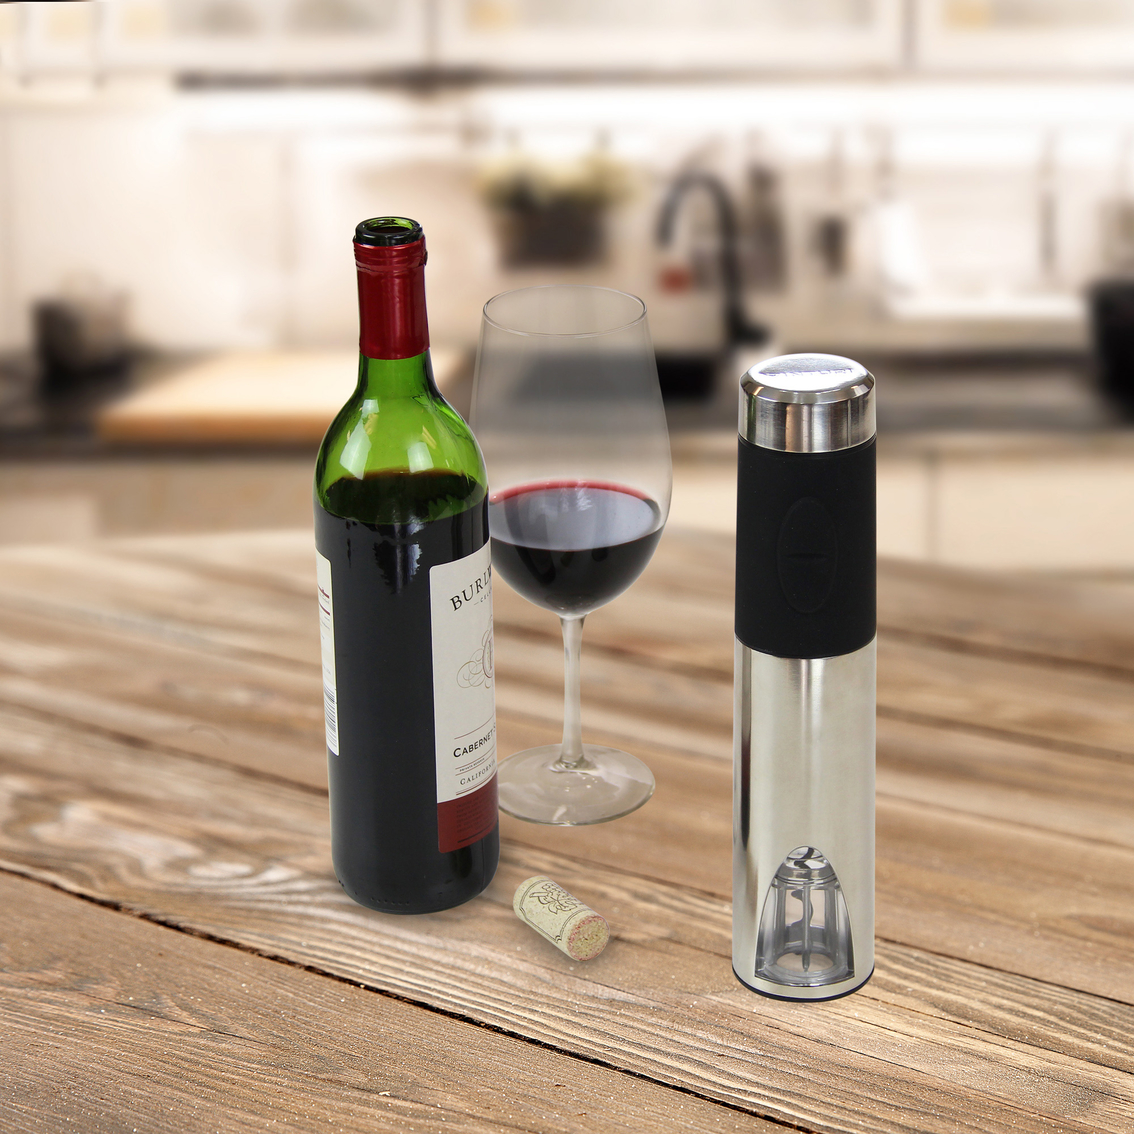 Vinturi Rechargeable Wine Opener with Base and Foil Cutter - Image 7 of 7